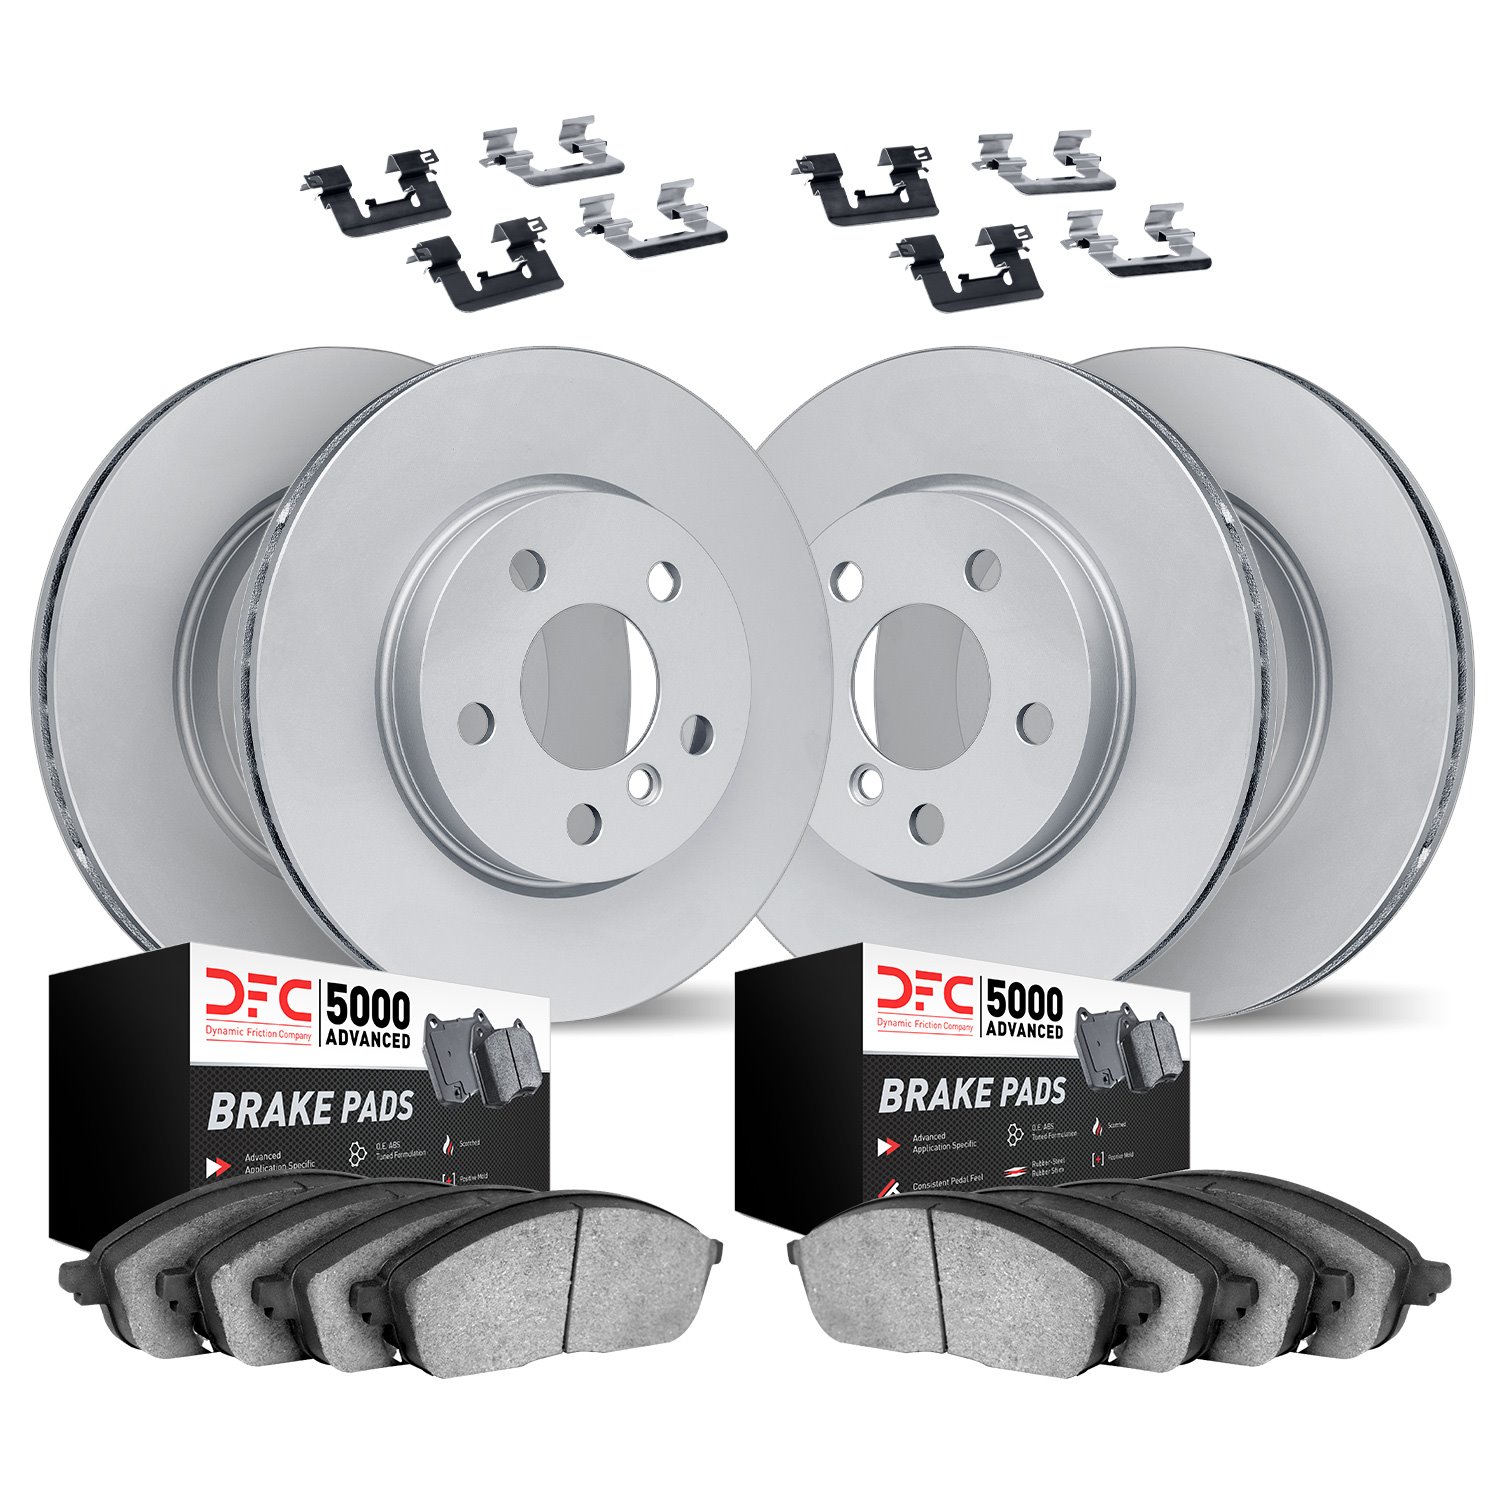 9514-02032 GEOMET Brake Rotors w/5000 Advanced Brake Pads Kit & Hardware, Fits Select Porsche, Position: Front and Rear